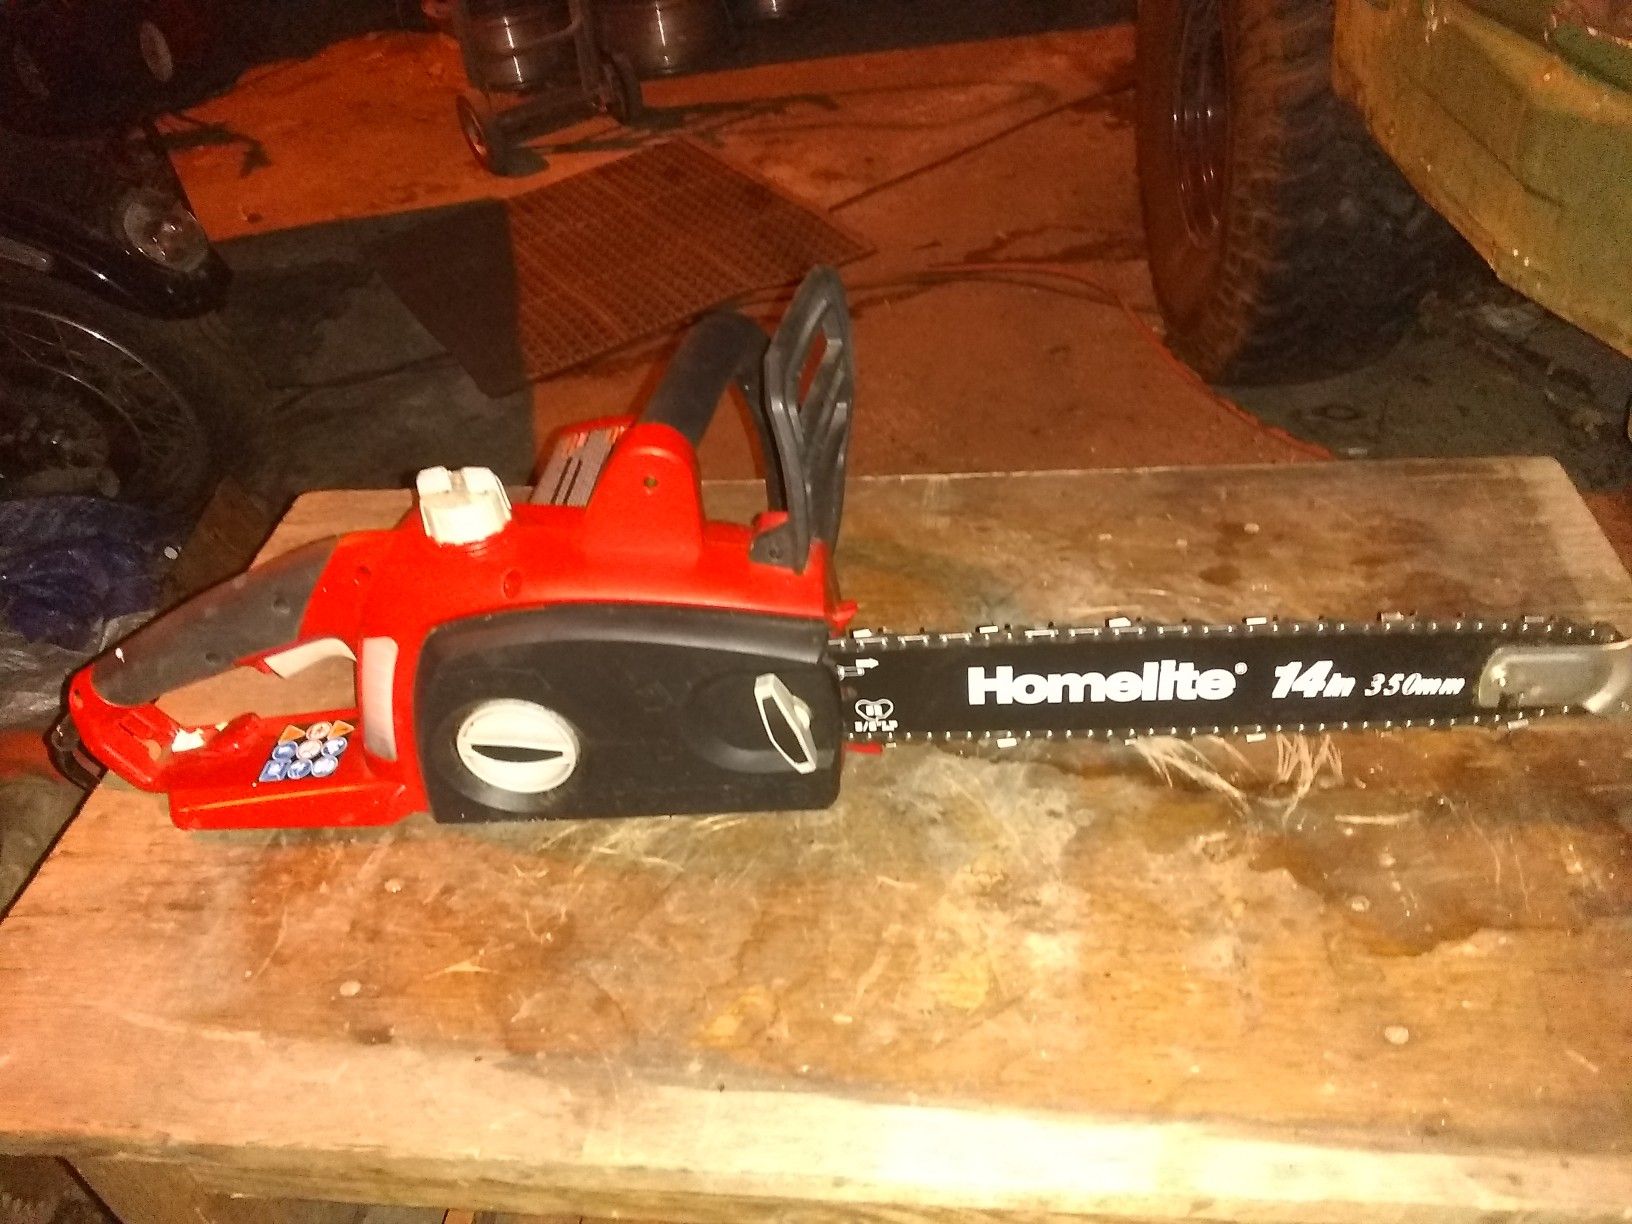 Homelite 14" electric chainsaw